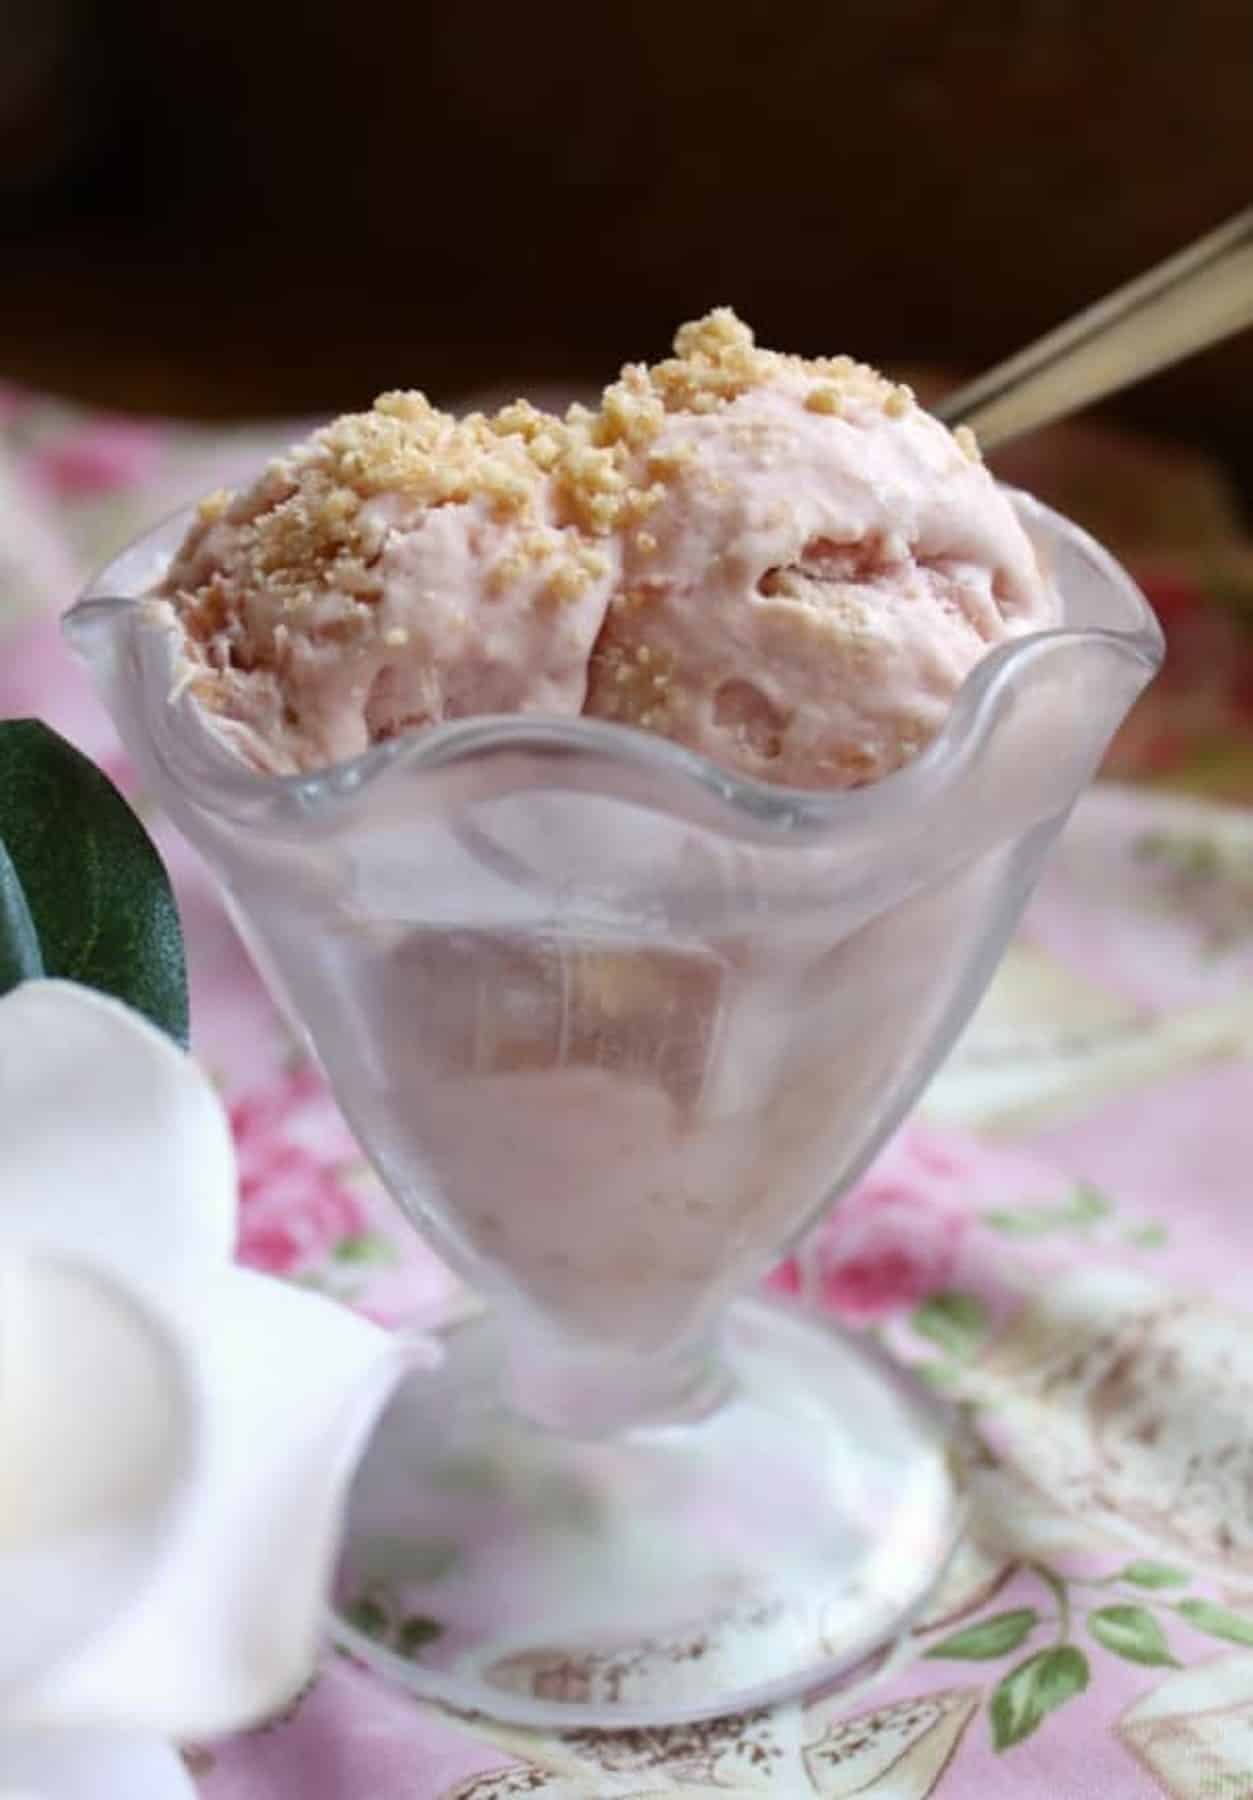 Rhubarb Crumble Ice Cream served in a glass with a spoon.